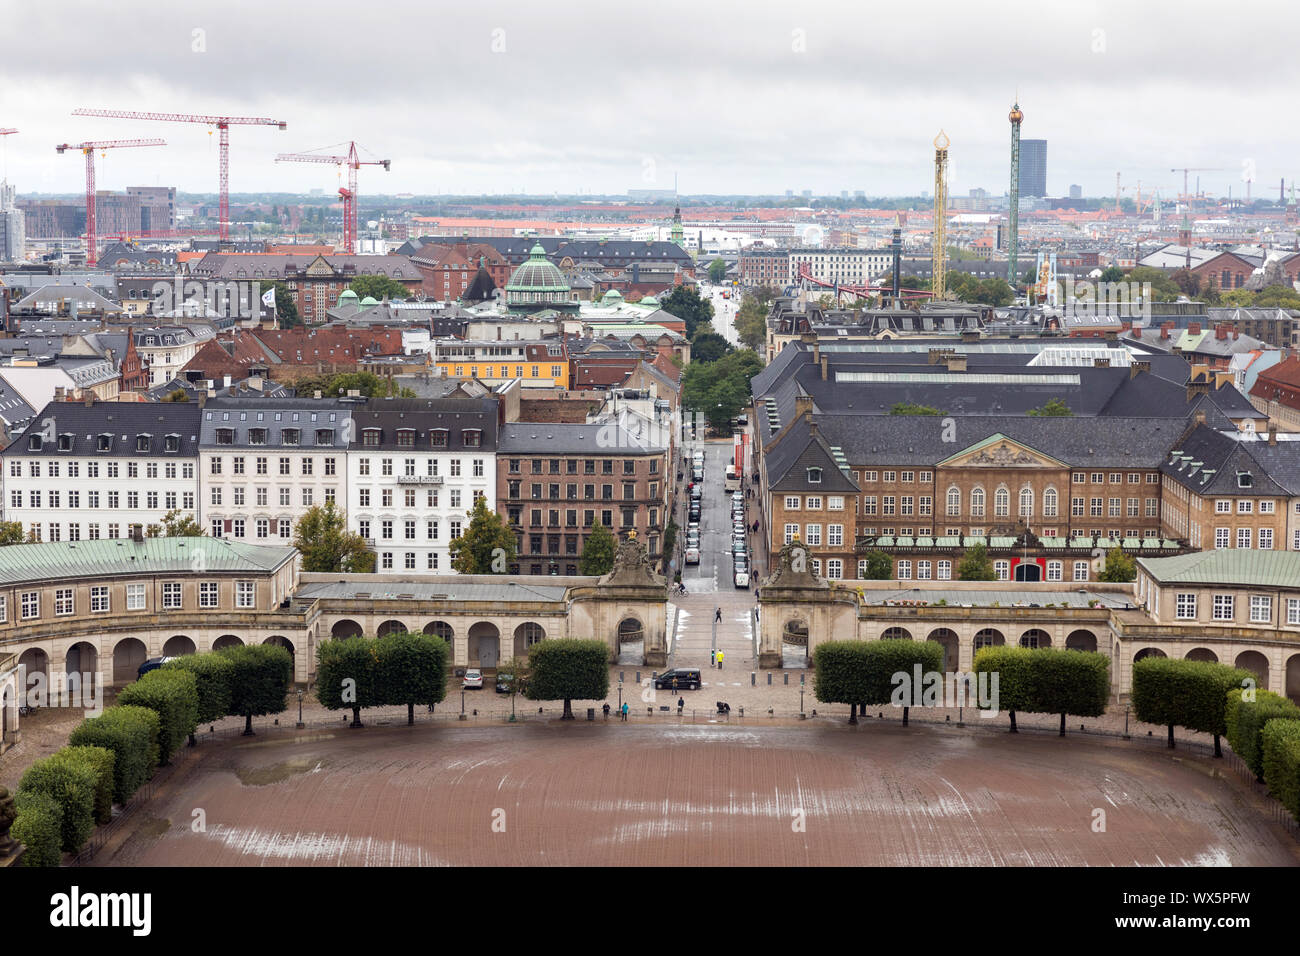 The skyline of Copenhagen, Denmark, with the stable yard of the Christiansborg Palace in the foreground and the fairground rides of Tivoli Gardens (r) Stock Photo